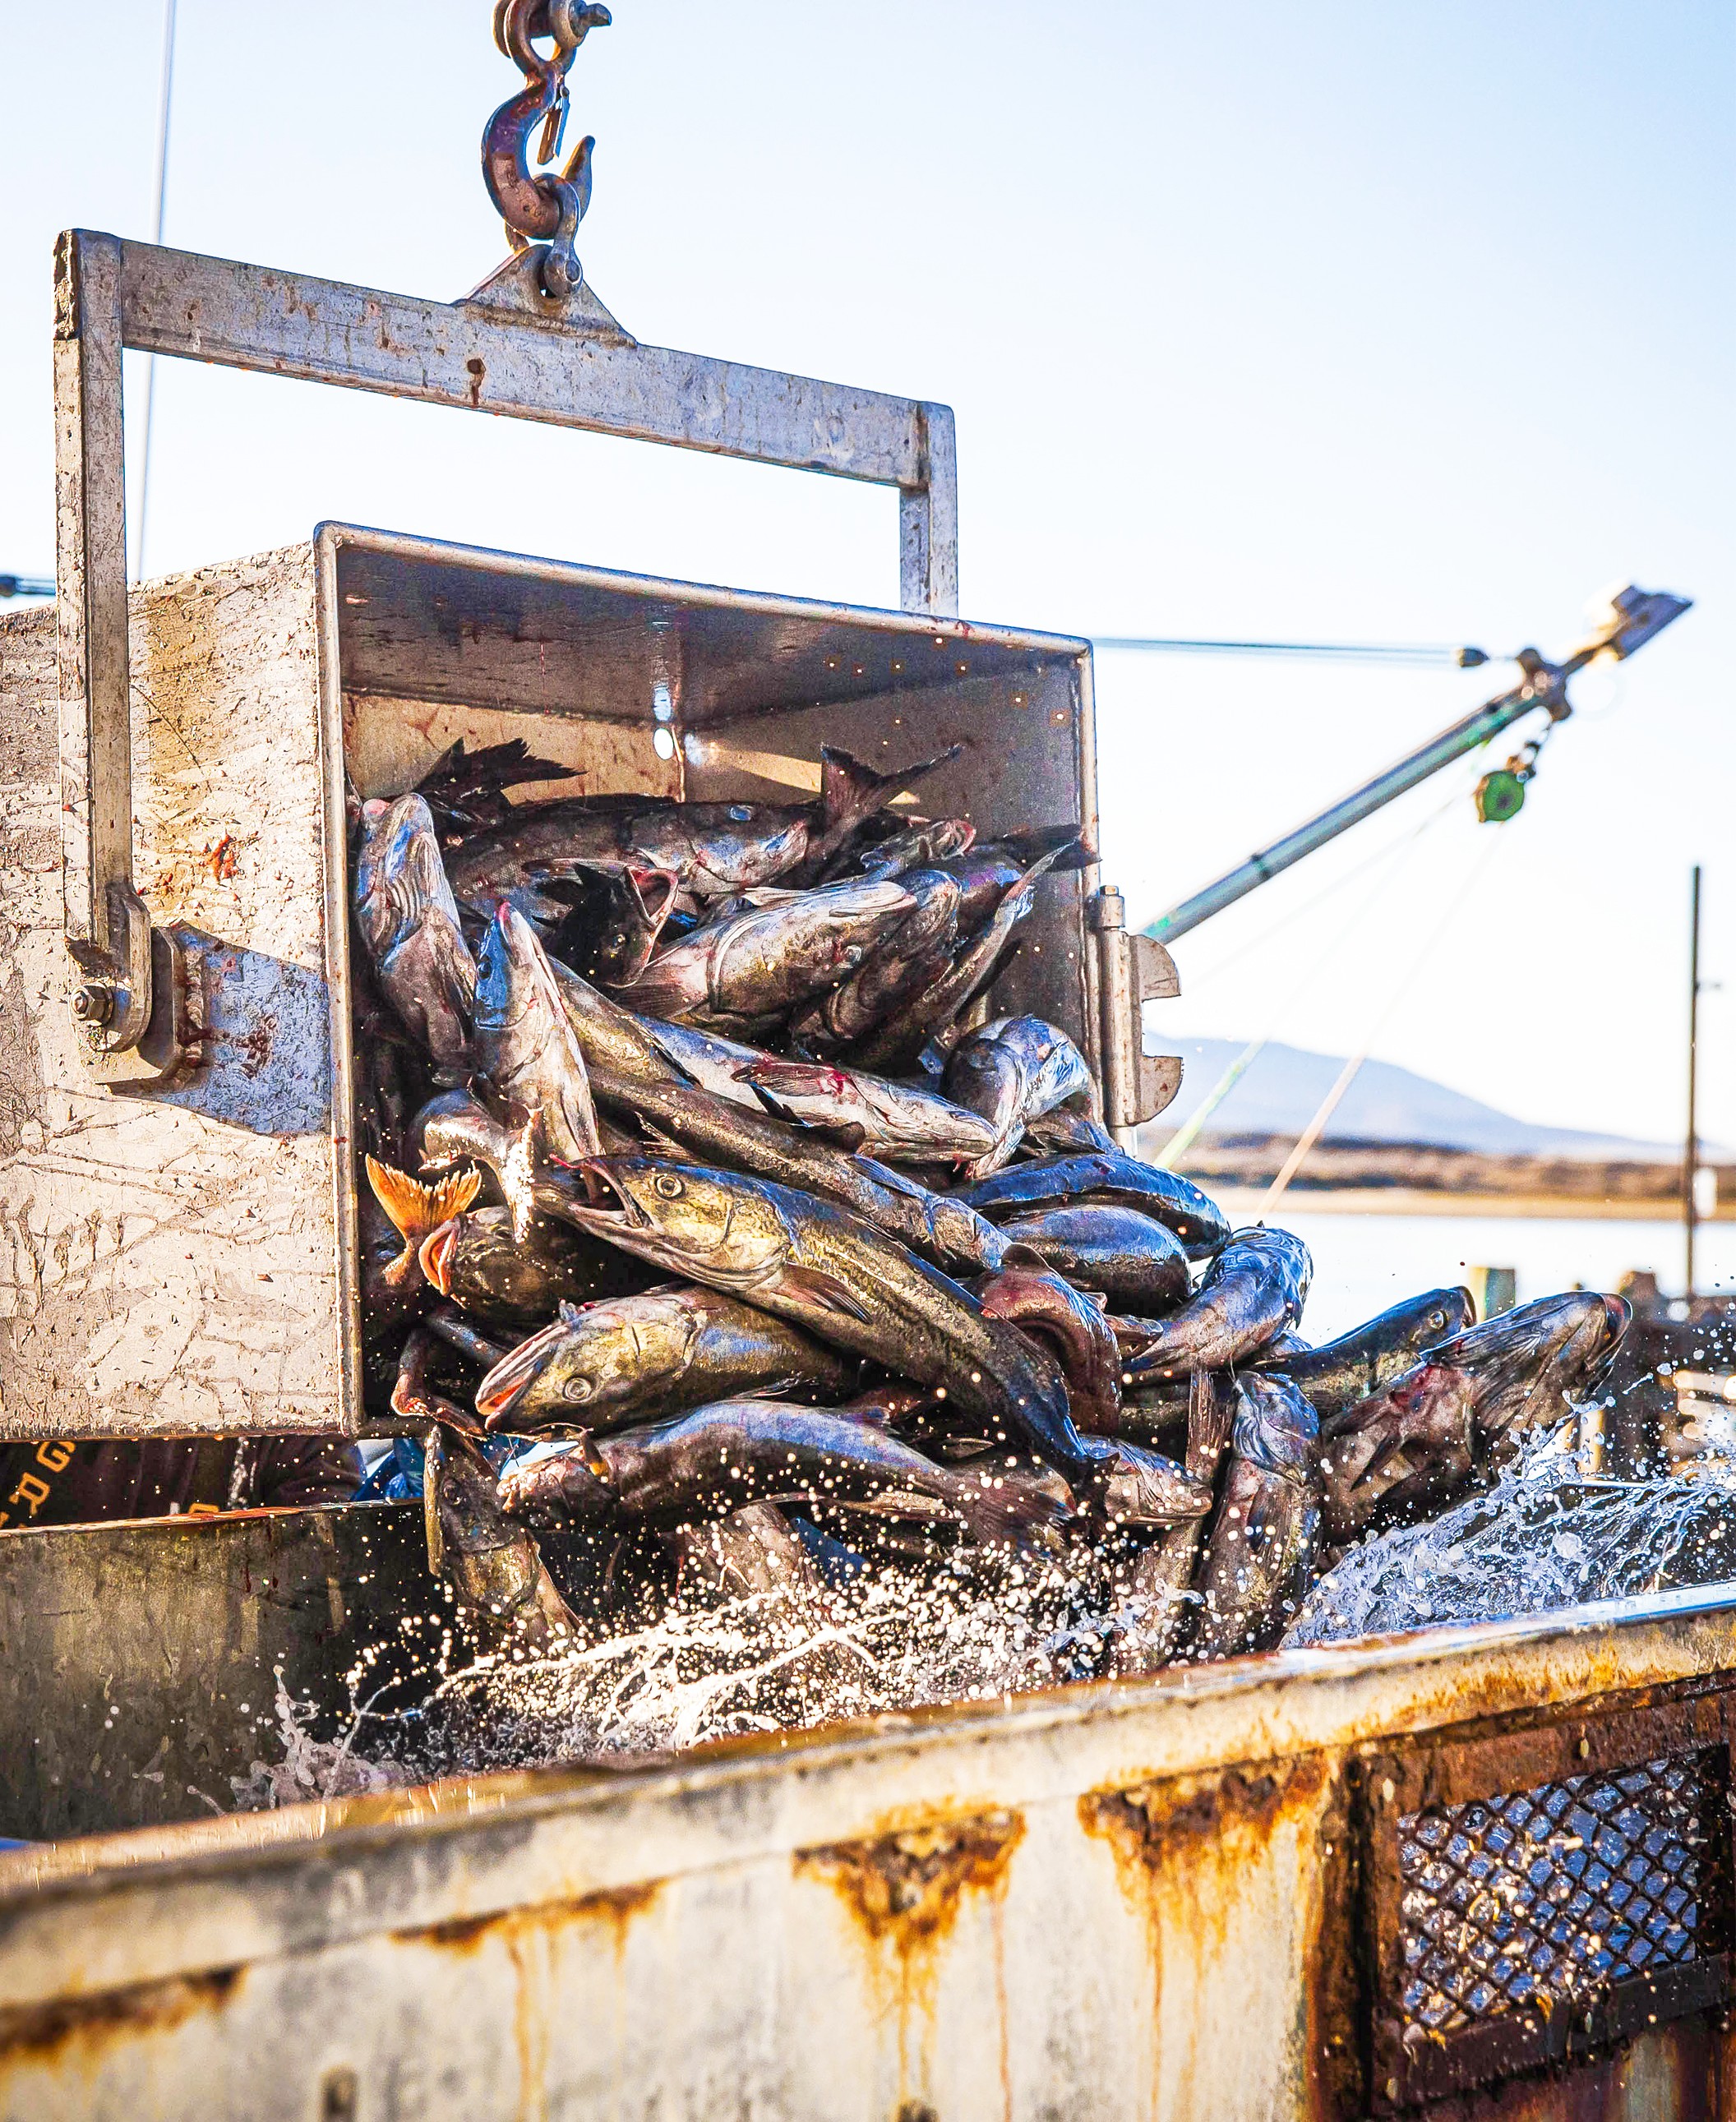 Dungeness crab season delayed by state regulators